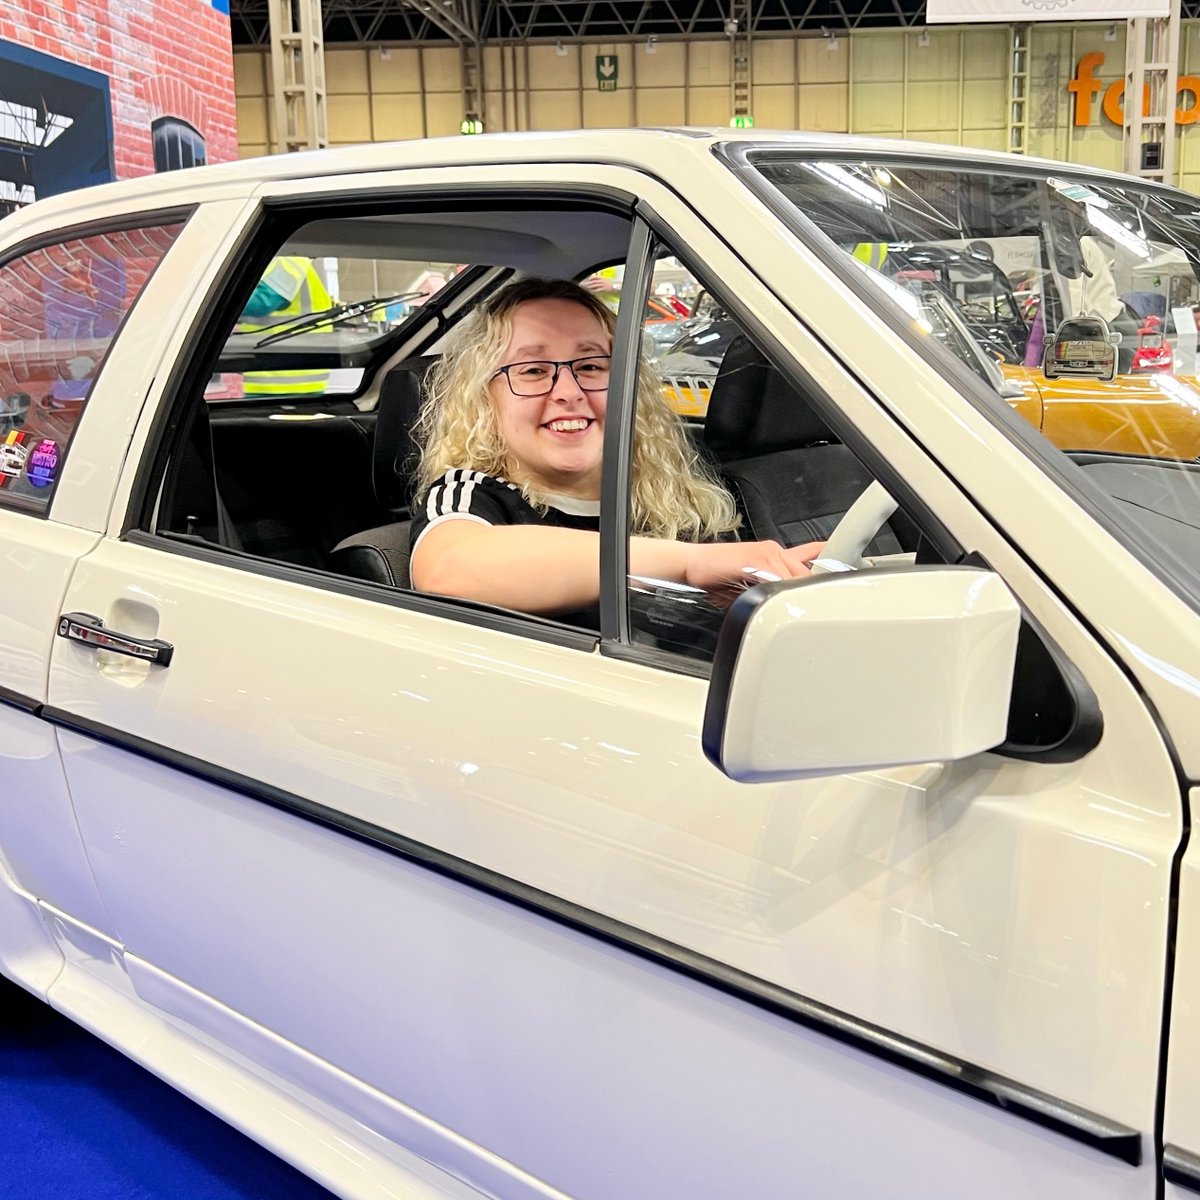 📣 Visit our Bright Young Spark, the wonderful Katie Bushell - @wrenching_wench - and her fantastic #VWScirocco at the Lancaster Insurance stand!

🚘 Katie will also appear on stage at 12:45pm 🎉

 #classicvw @PracticalClass @NECRestoShow